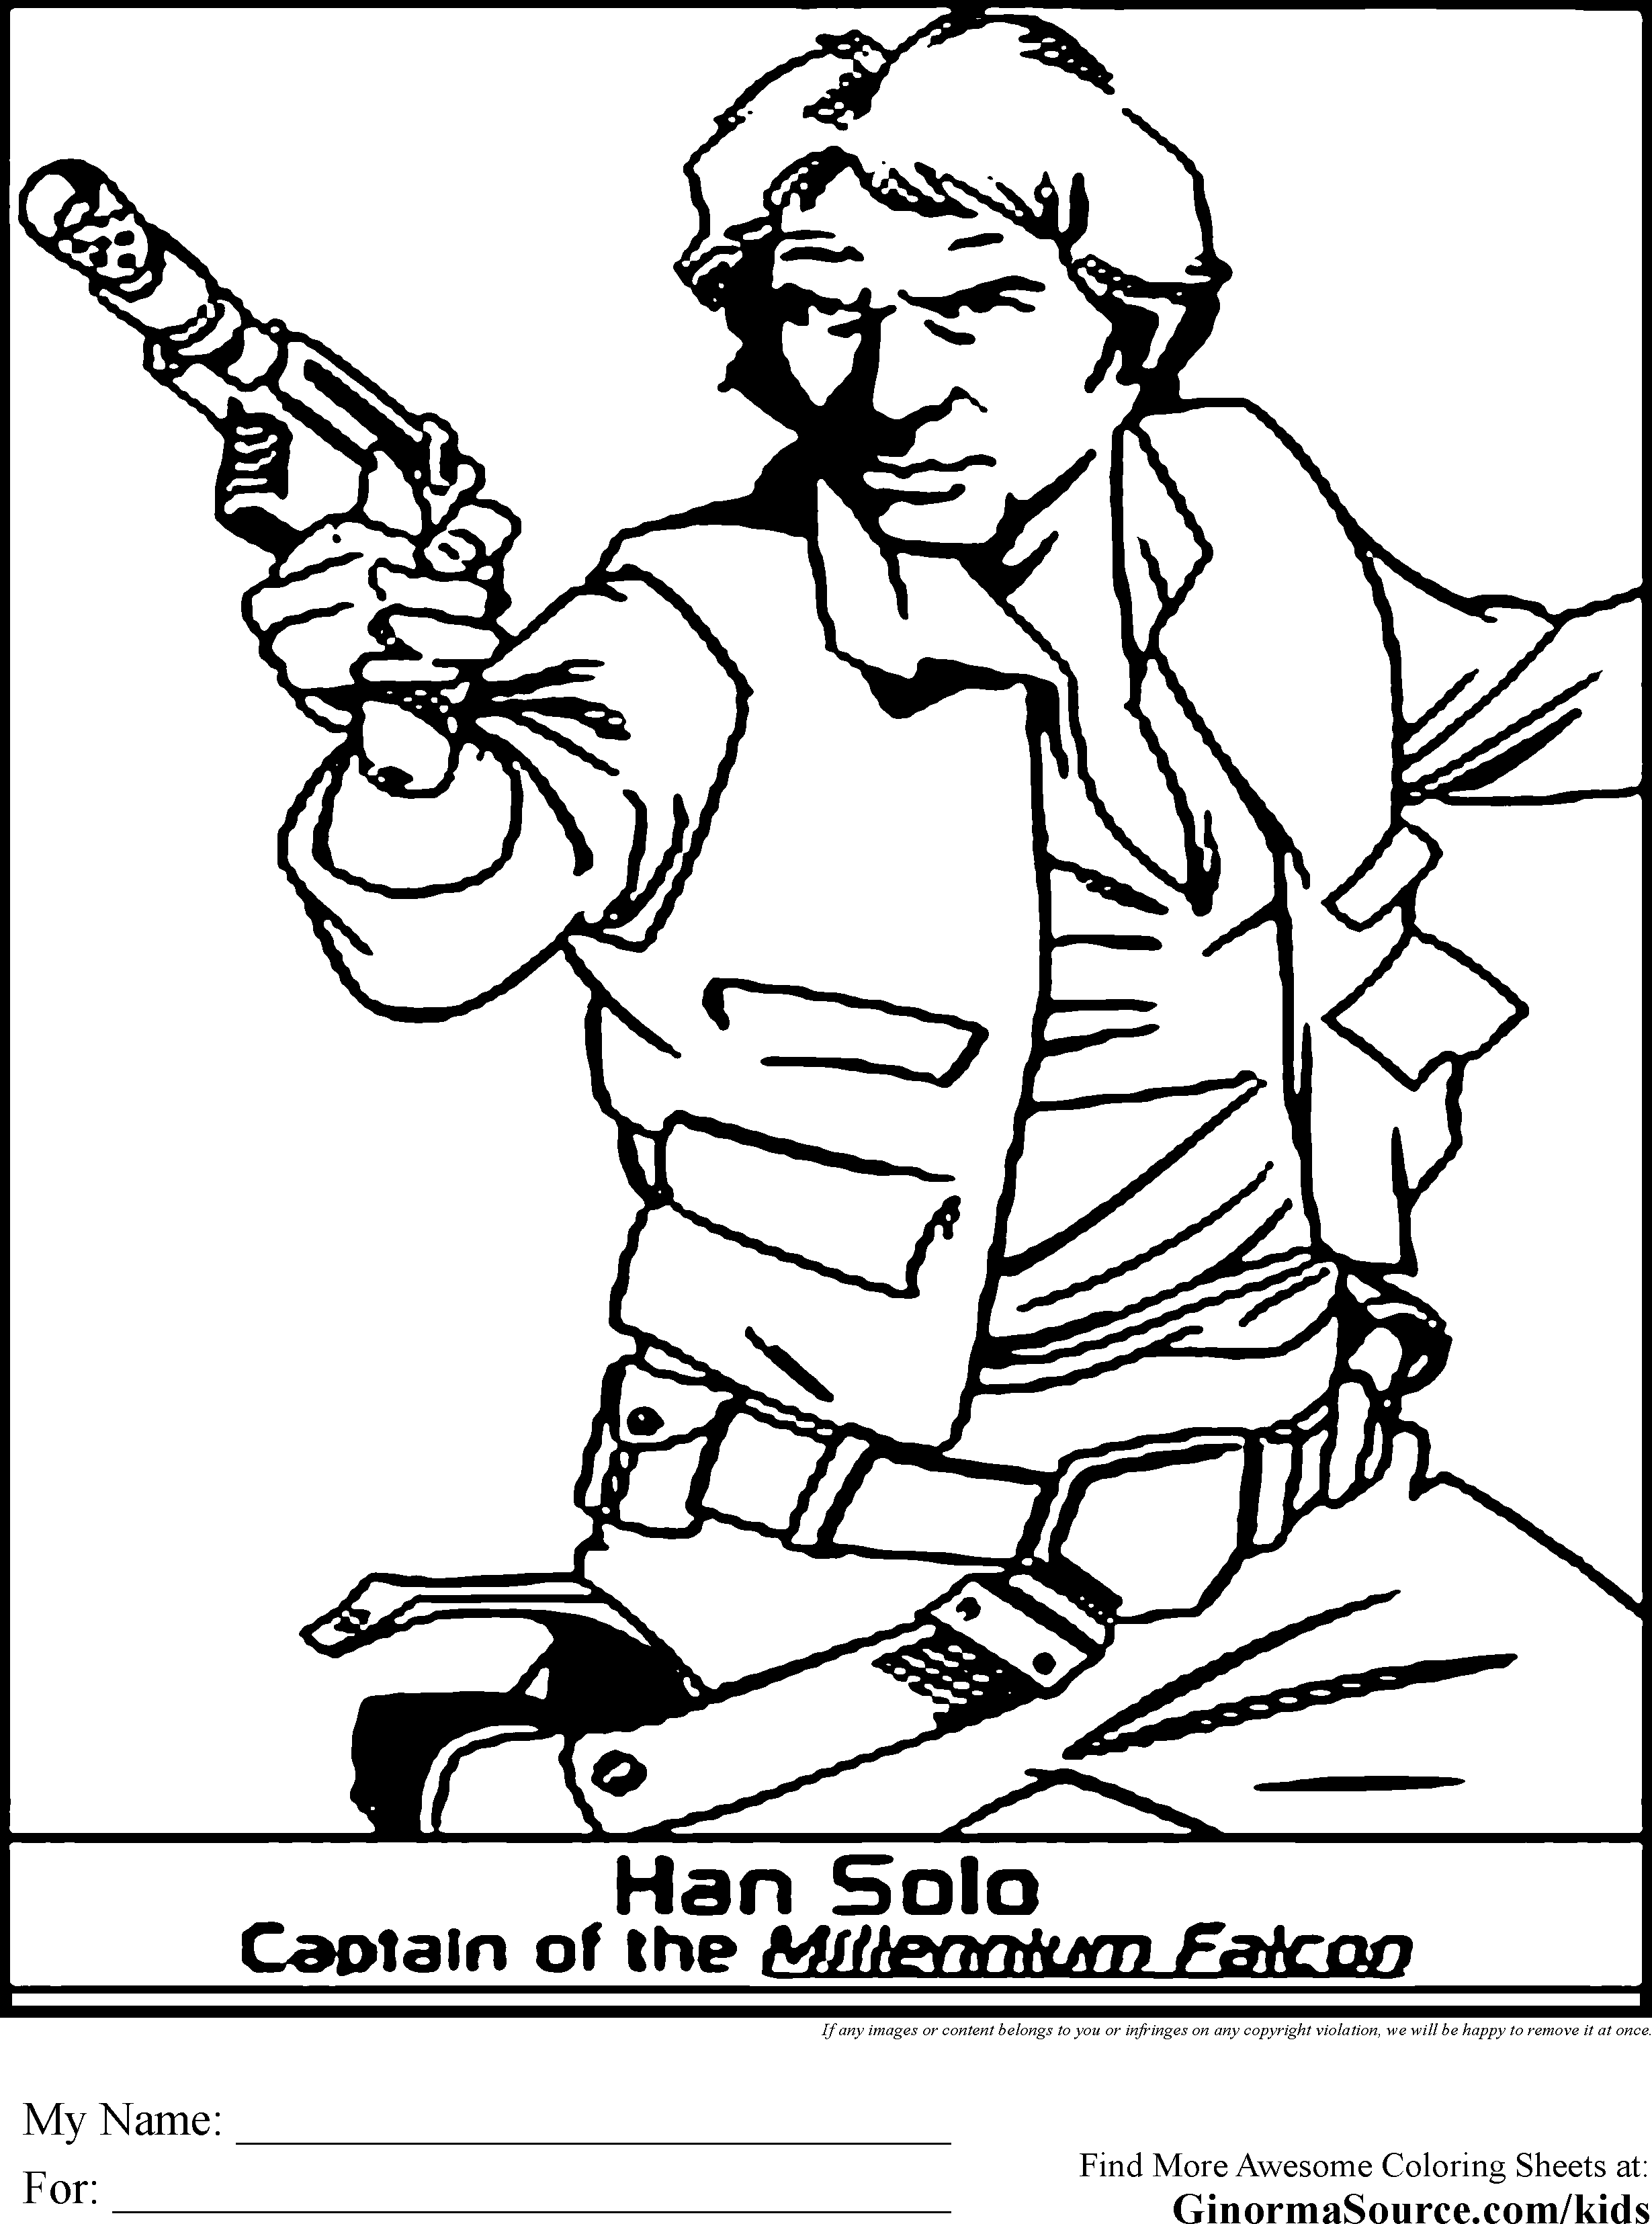 14 Pics of Han Solo Star Wars Coloring Pages - Star Wars Han Solo ...